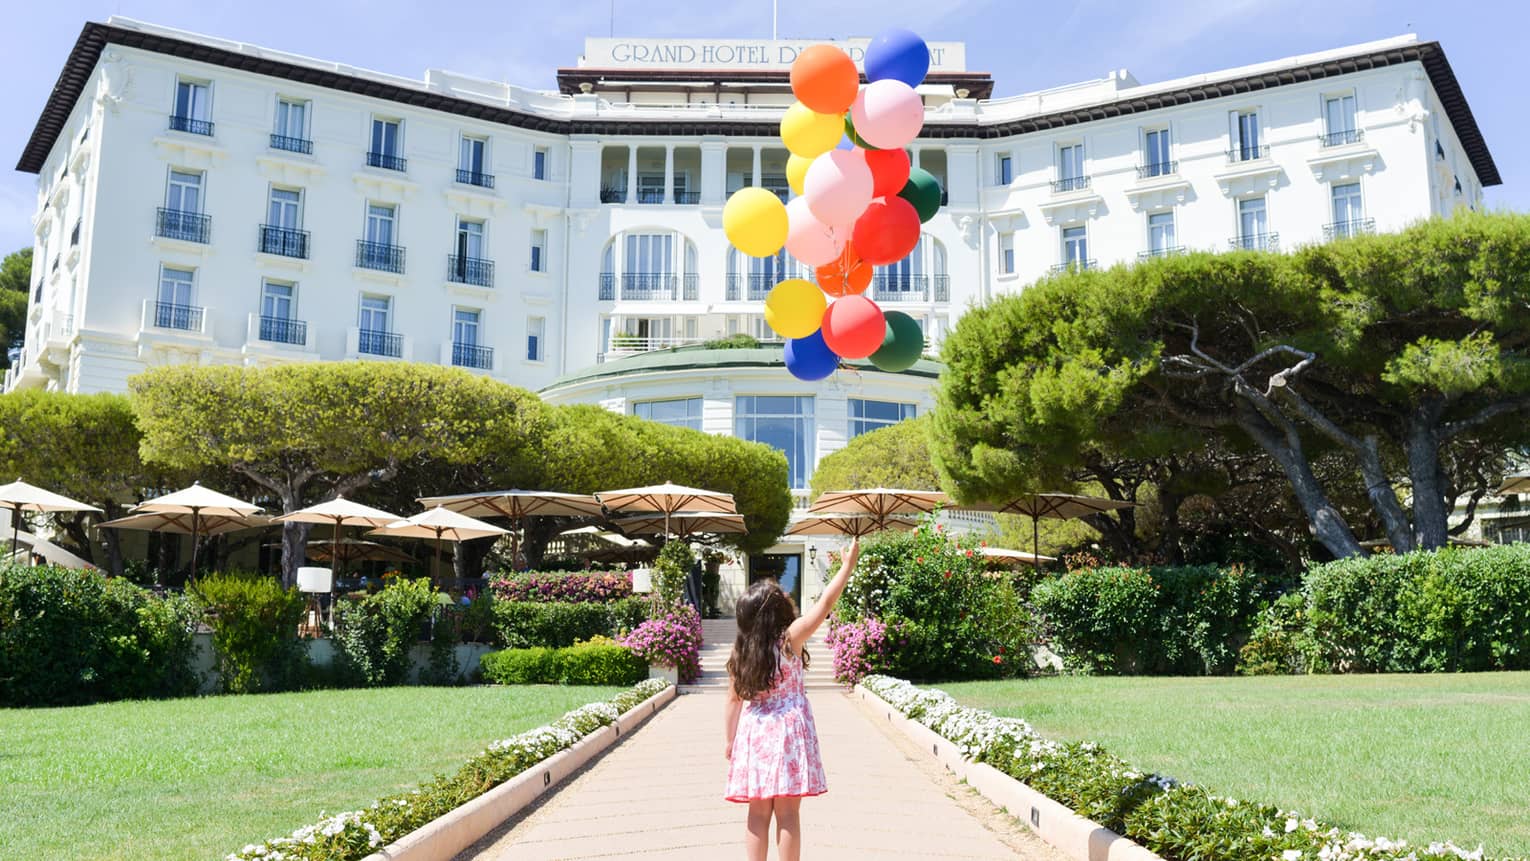 Young girl holds bunch of colourful balloons on brick path leading to hotel